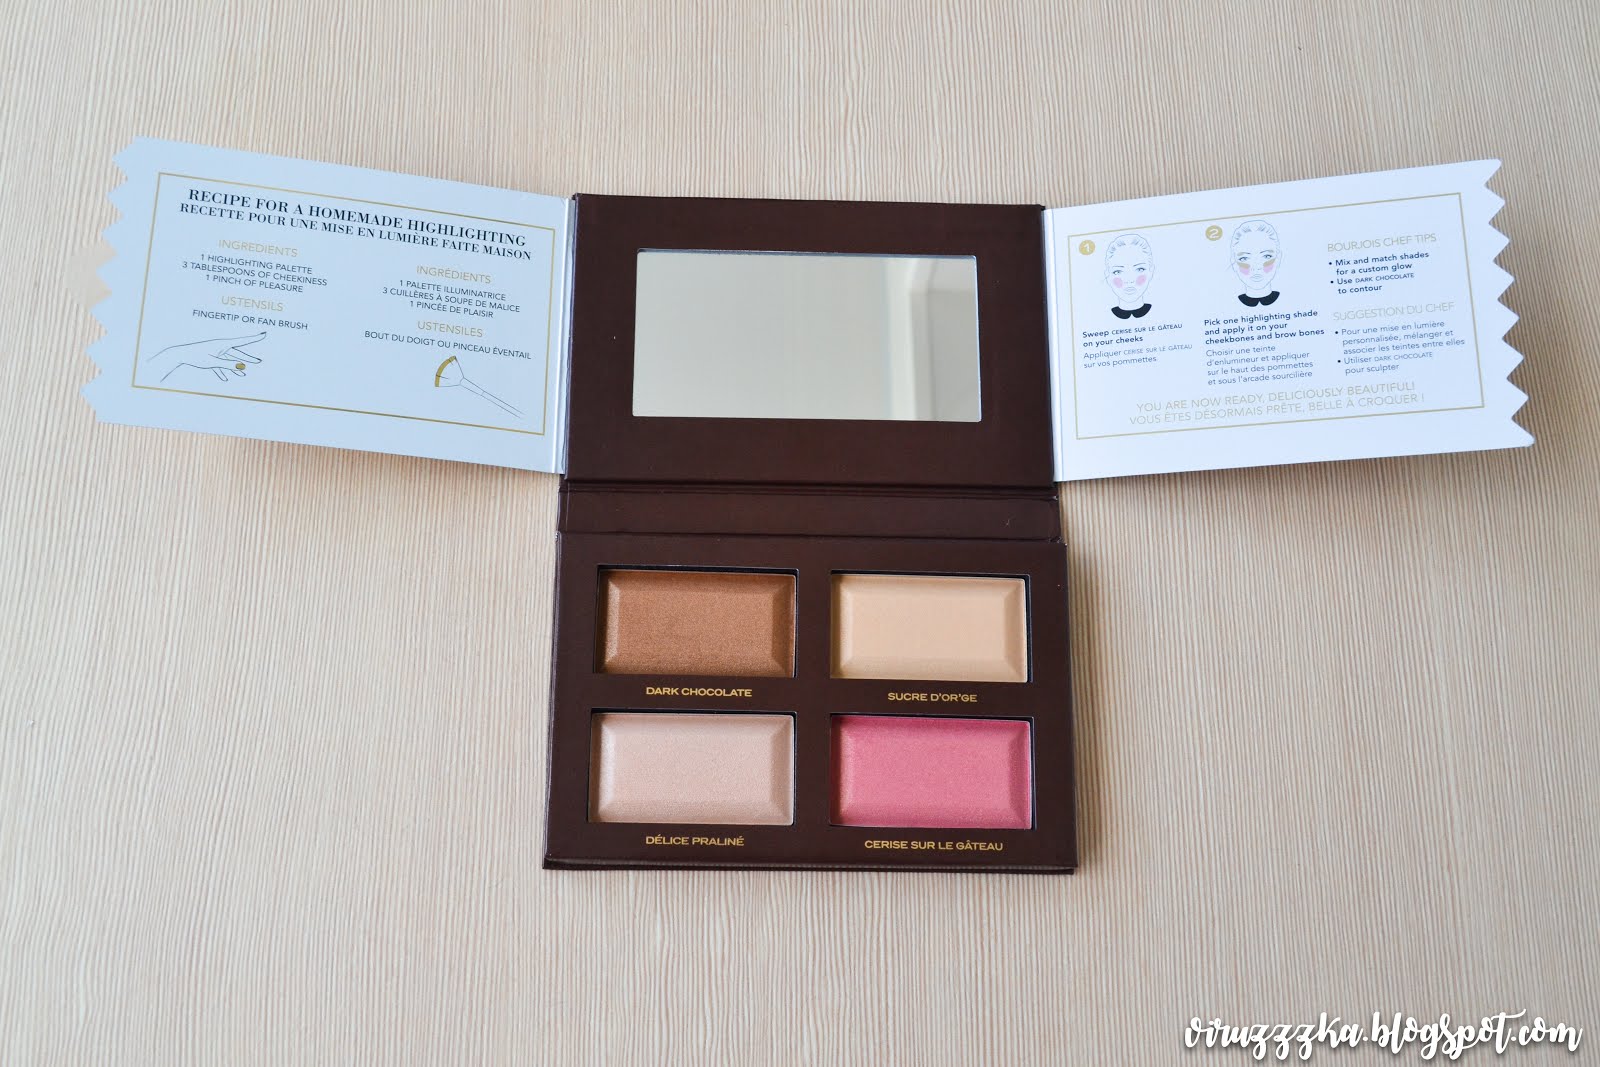 Bourjois Delice de Poudre Bronzing & Highlighting Palette Review Swatches